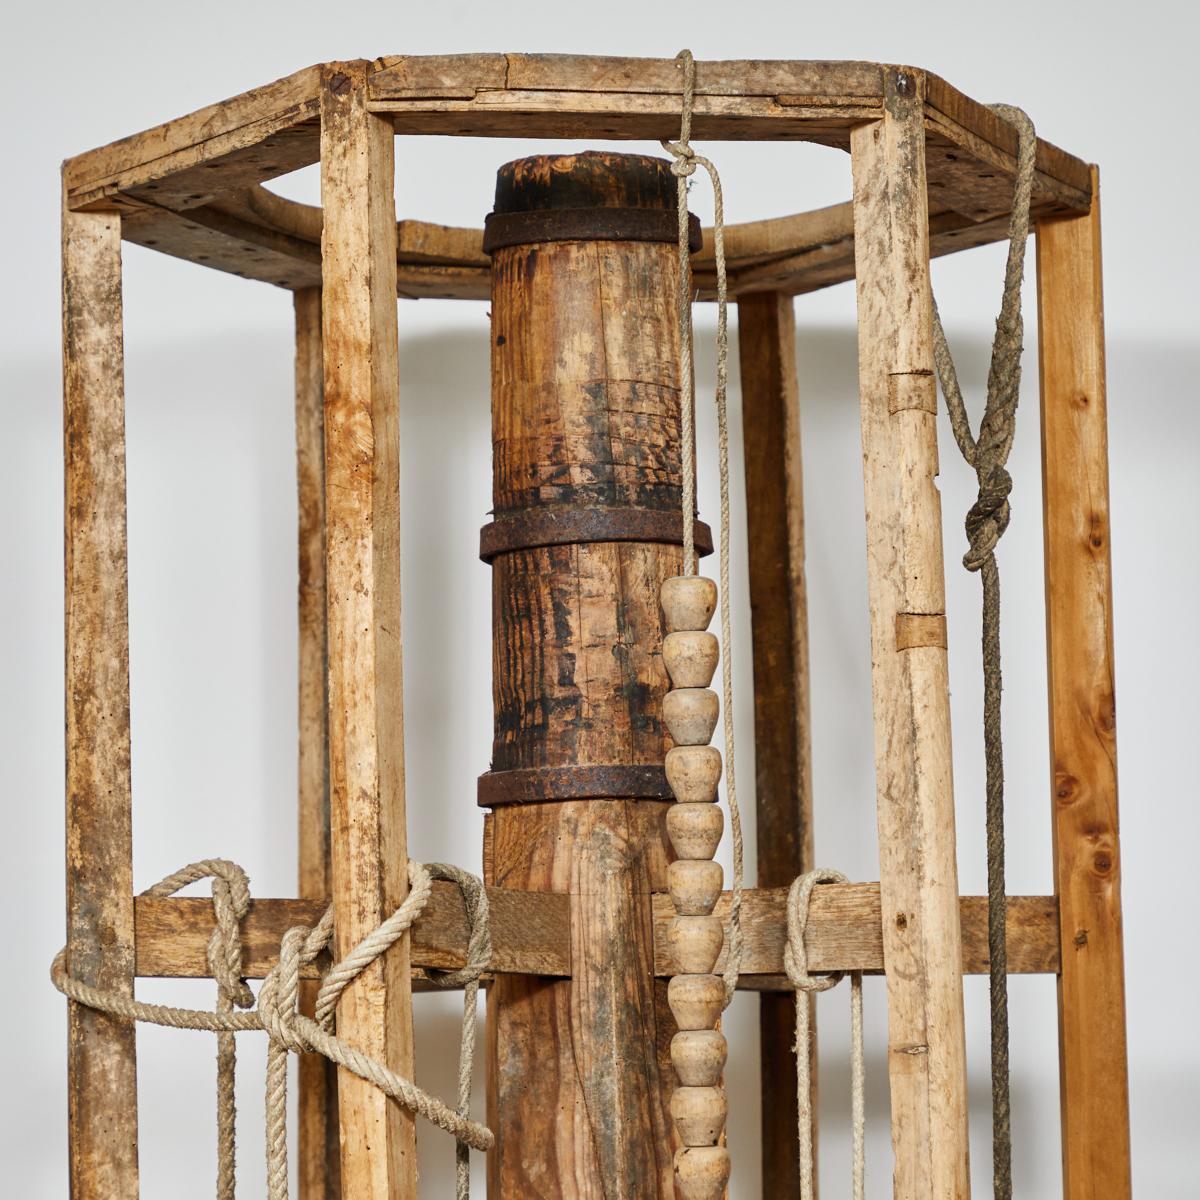 1880s wood grain element as sculpture. Tall, primitive wood can be placed indoors or outdoors.